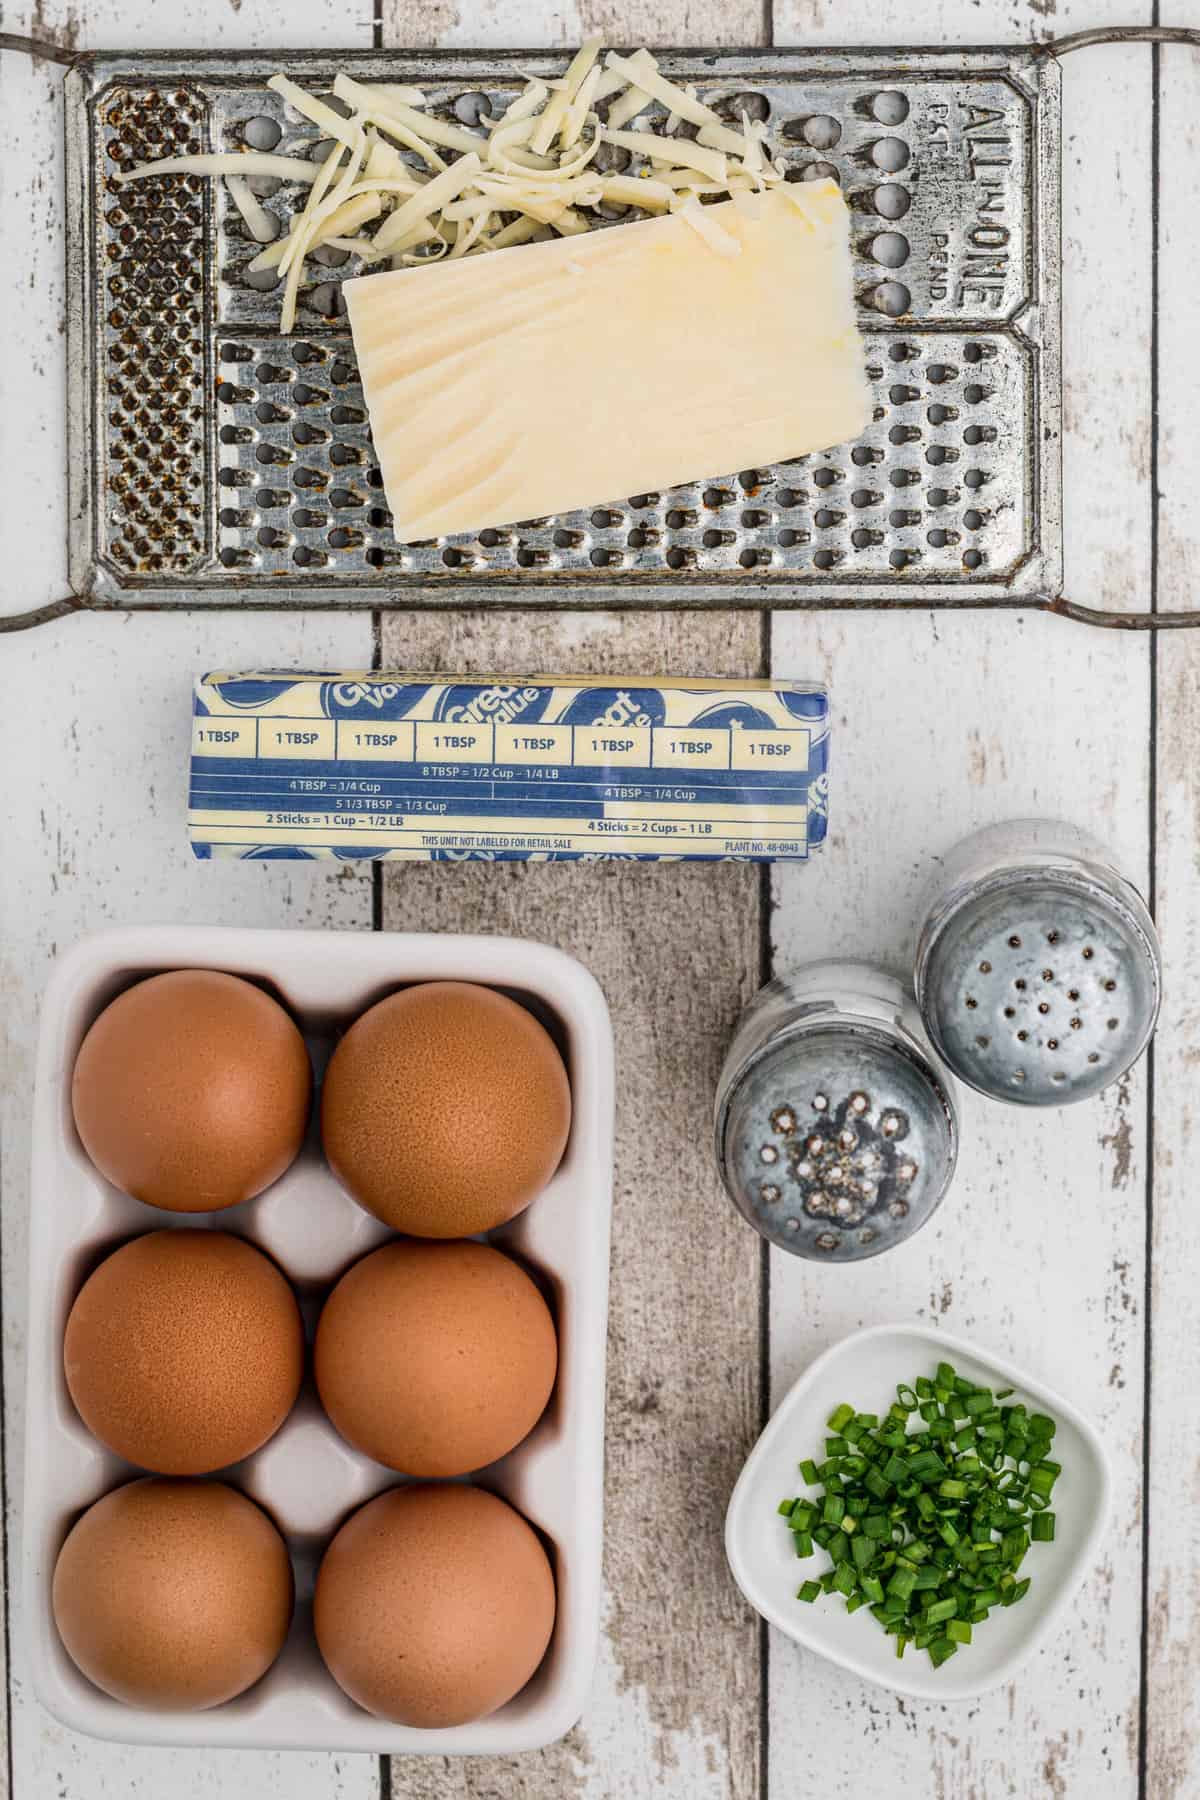 The ingredients for a french omelette are placed on a white wooden surface.